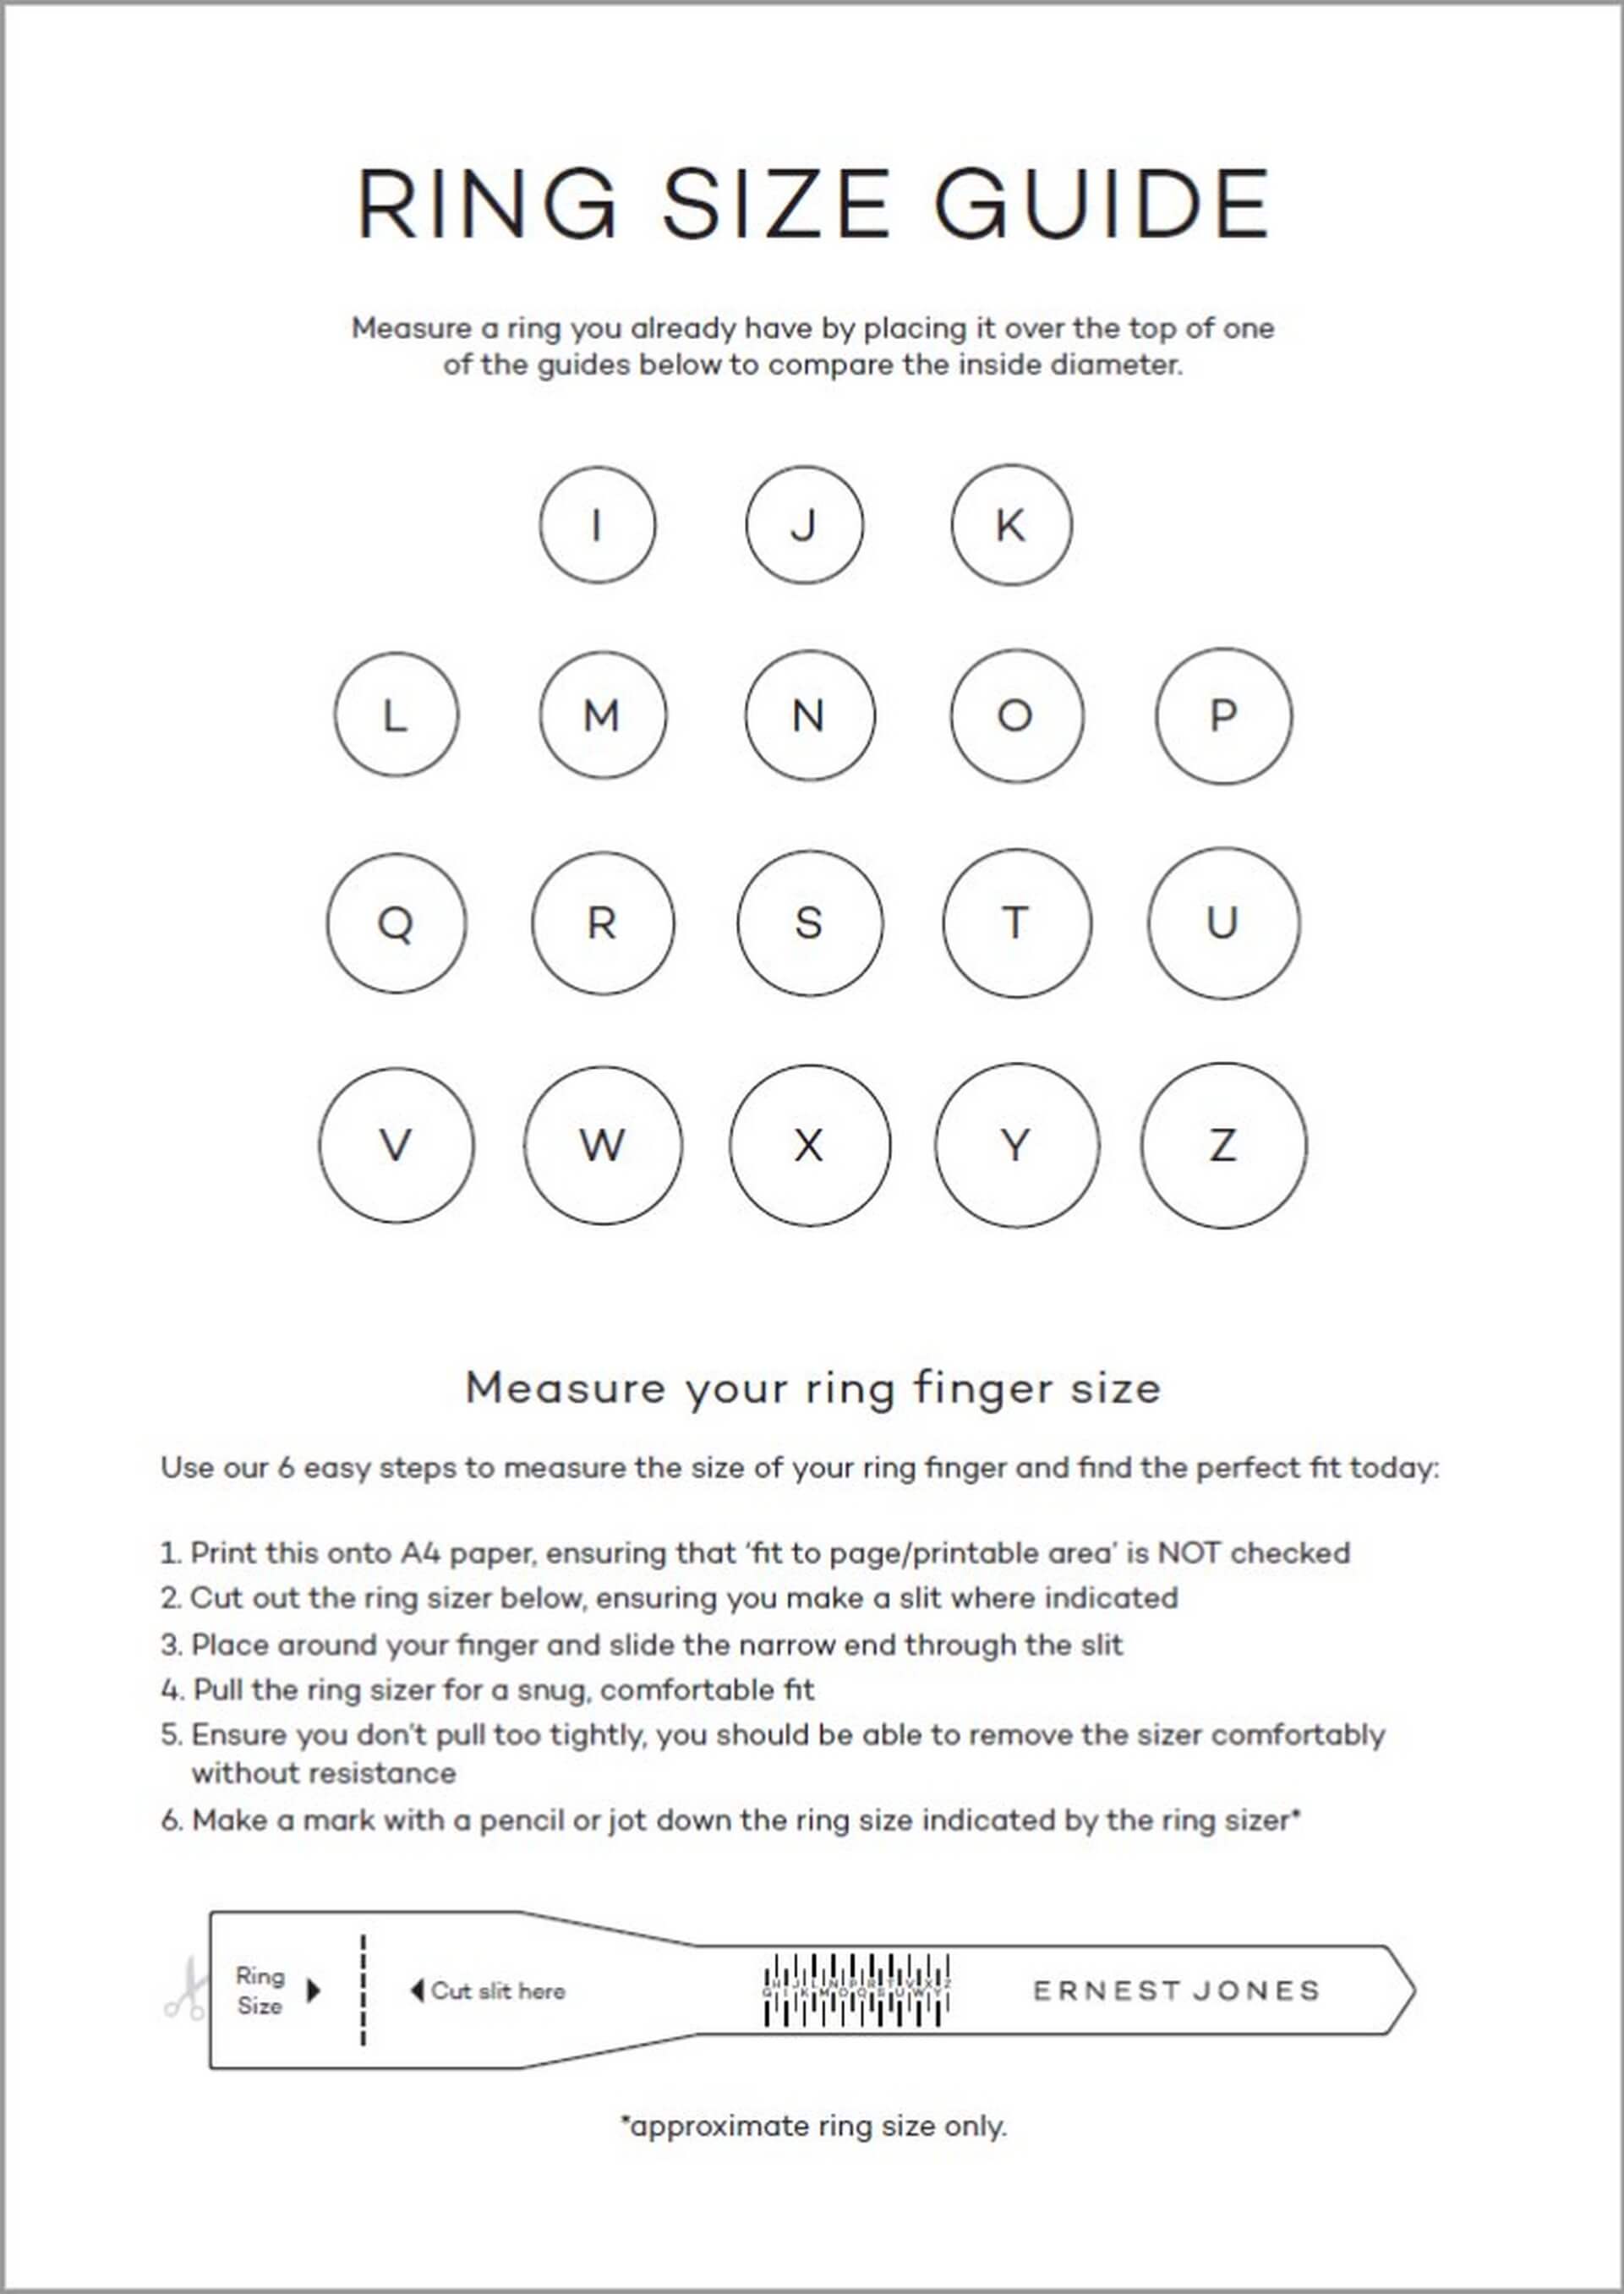 How To Check Perfect Ring Size At Home - 4 Possible Ways — Ouros Jewels